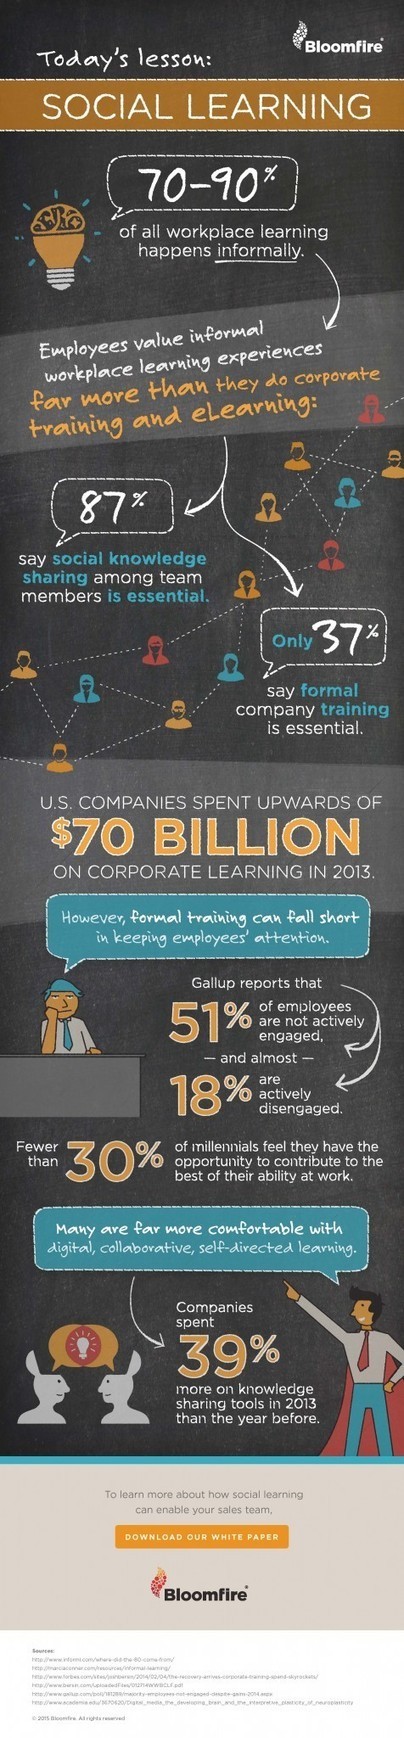 The Importance of Social Learning for Companies Infographic | E-Learning-Inclusivo (Mashup) | Scoop.it